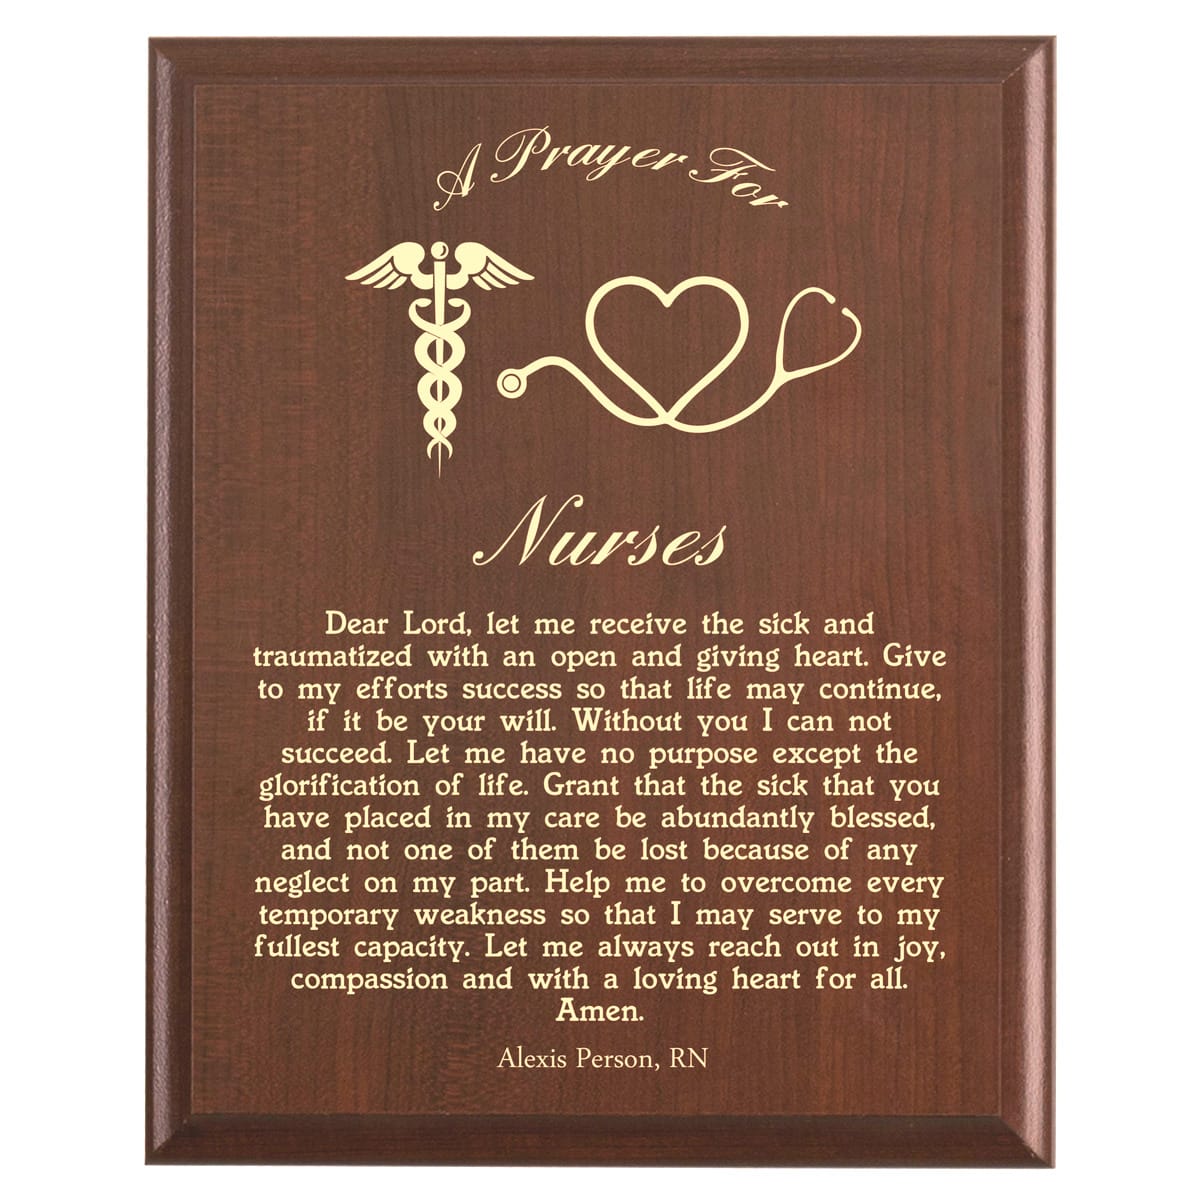 Plaque photo: Nurses Prayer Plaque design with free personalization. Wood style finish with customized text.